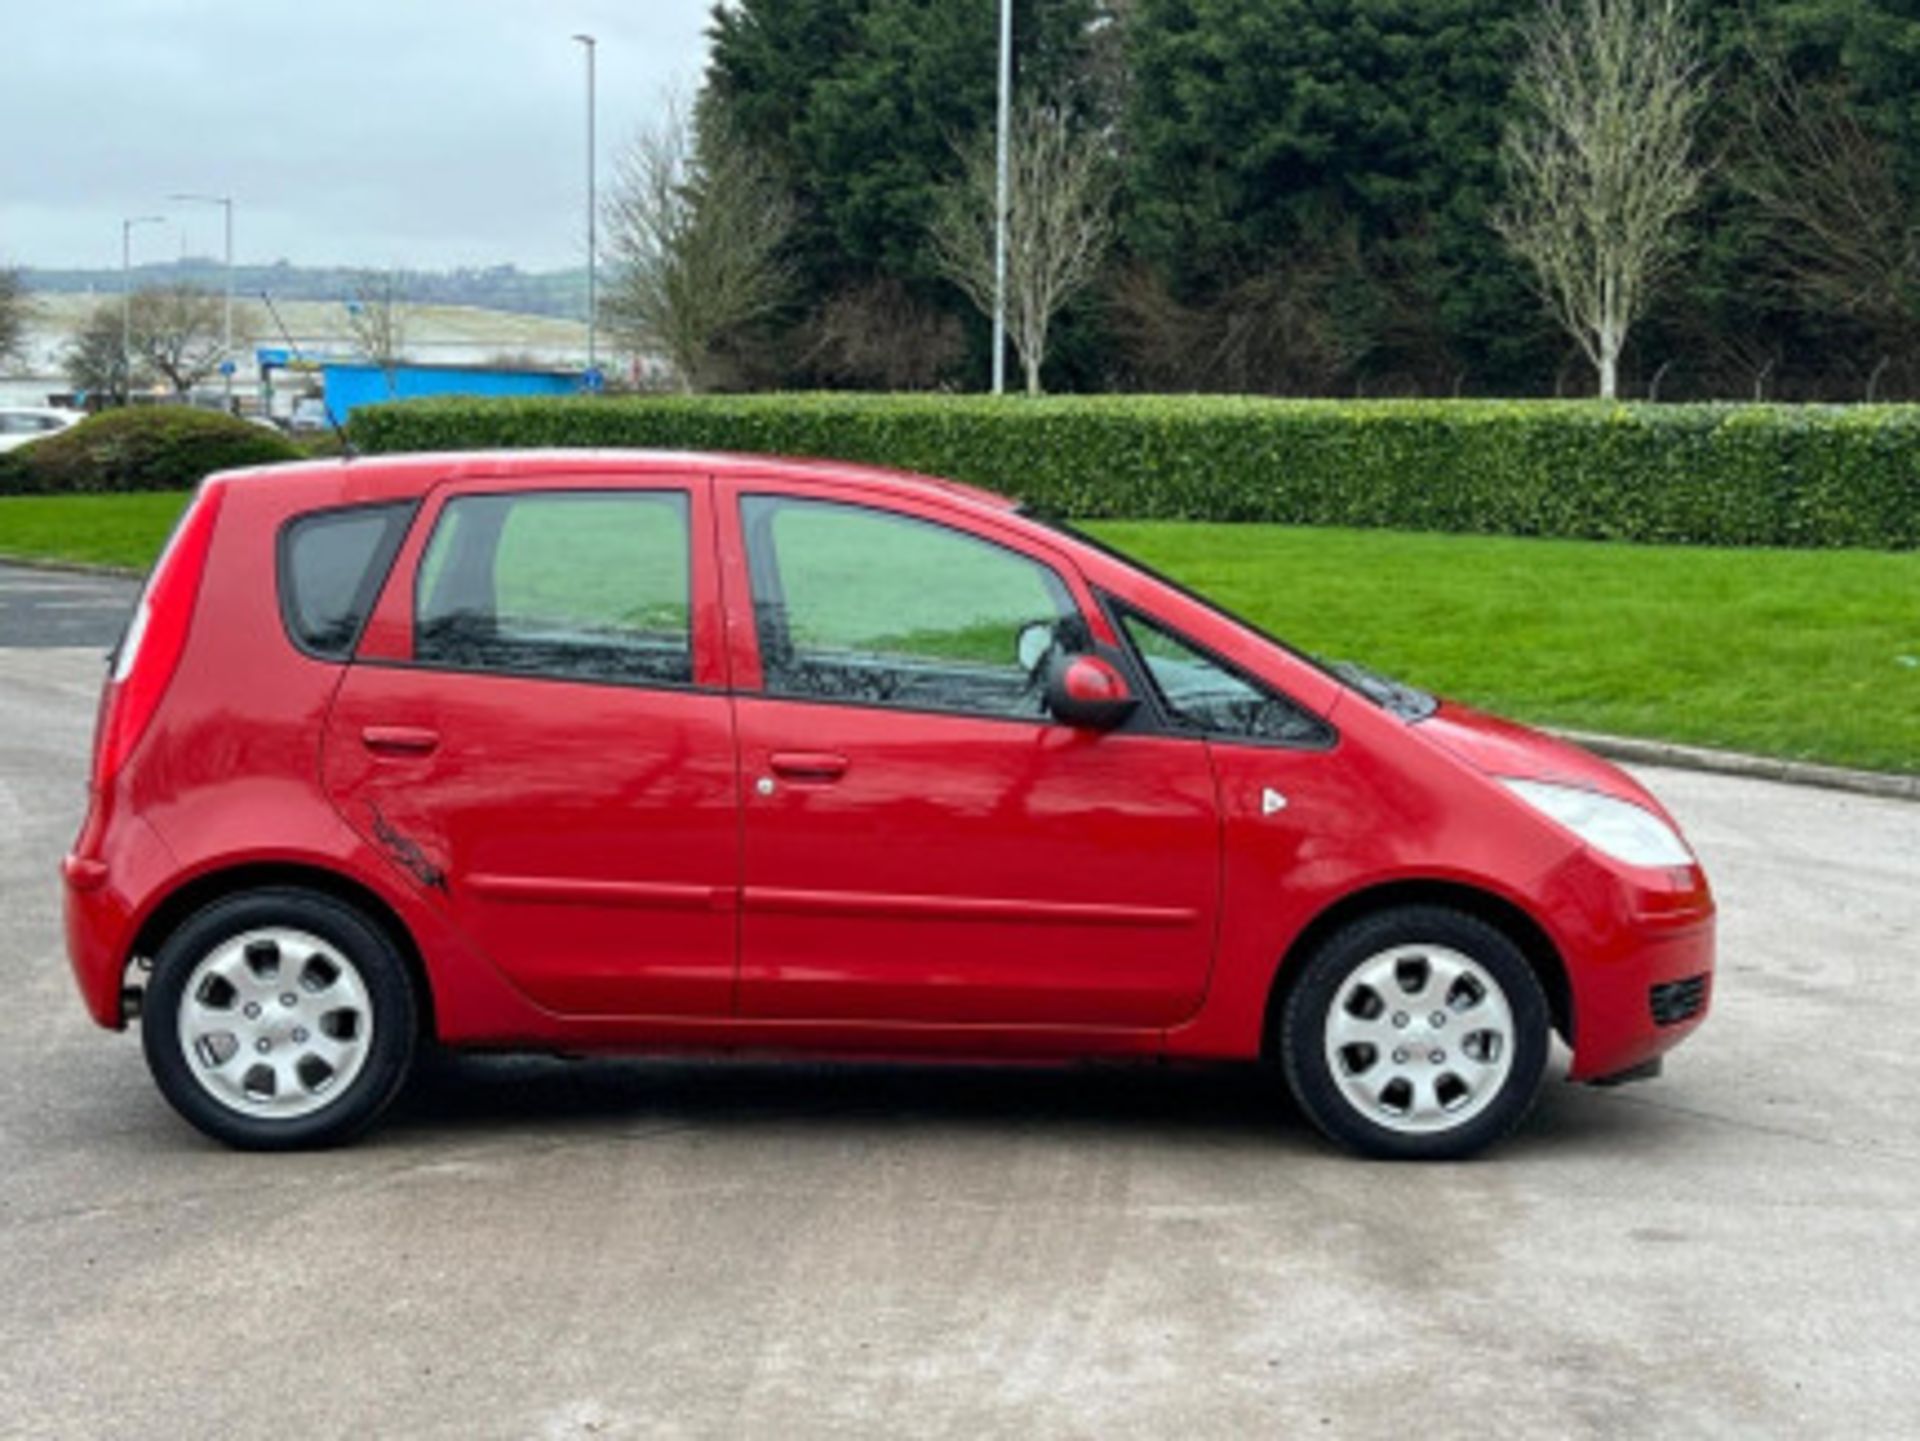 2007 MITSUBISHI COLT 1.5 DI-D DIESEL AUTOMATIC >>--NO VAT ON HAMMER--<< - Image 52 of 127